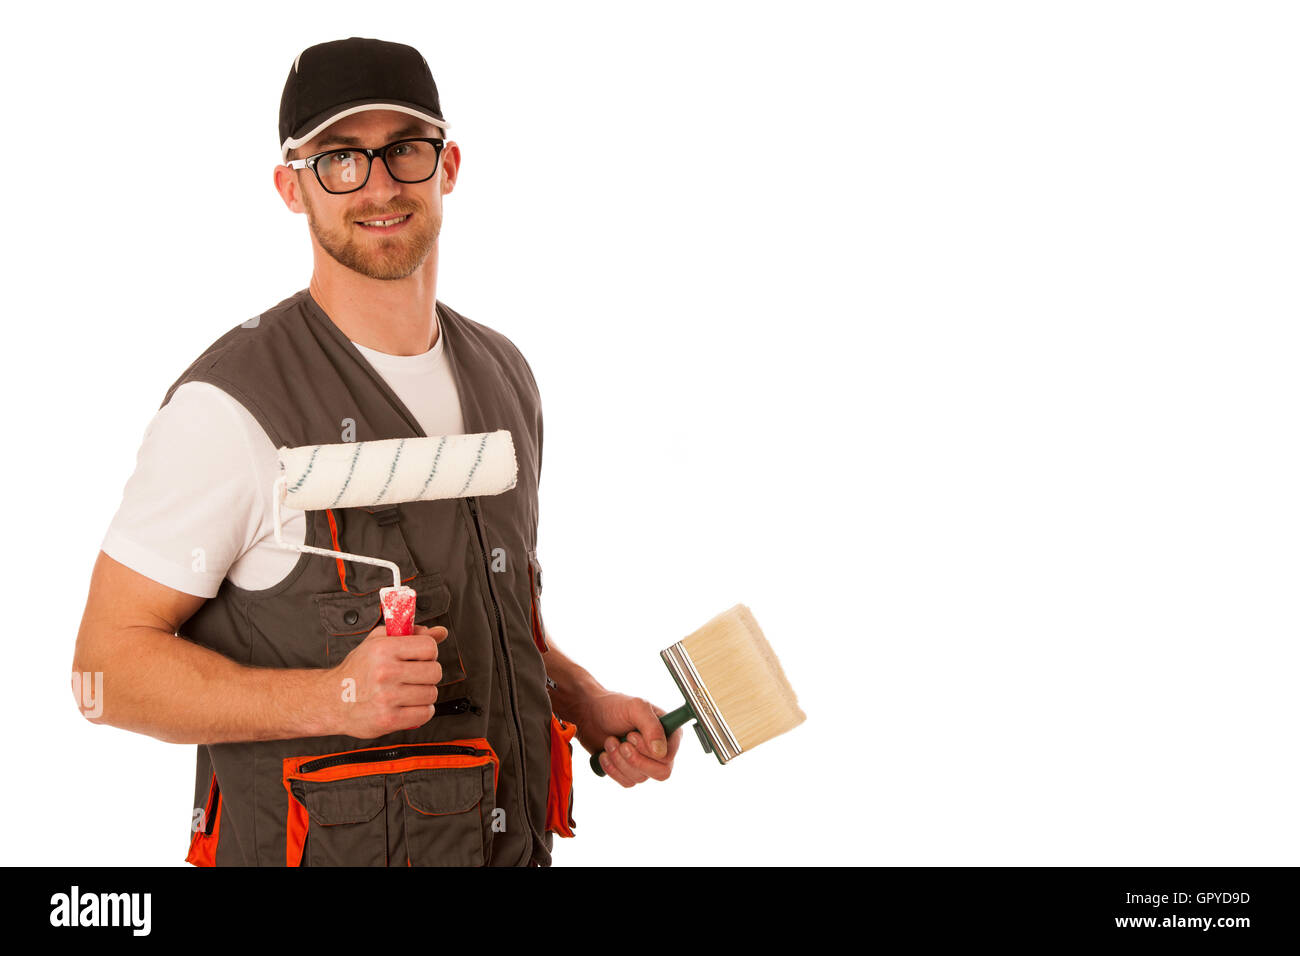 Handyman in work clothing with bleaching tools isolated over white. Stock Photo